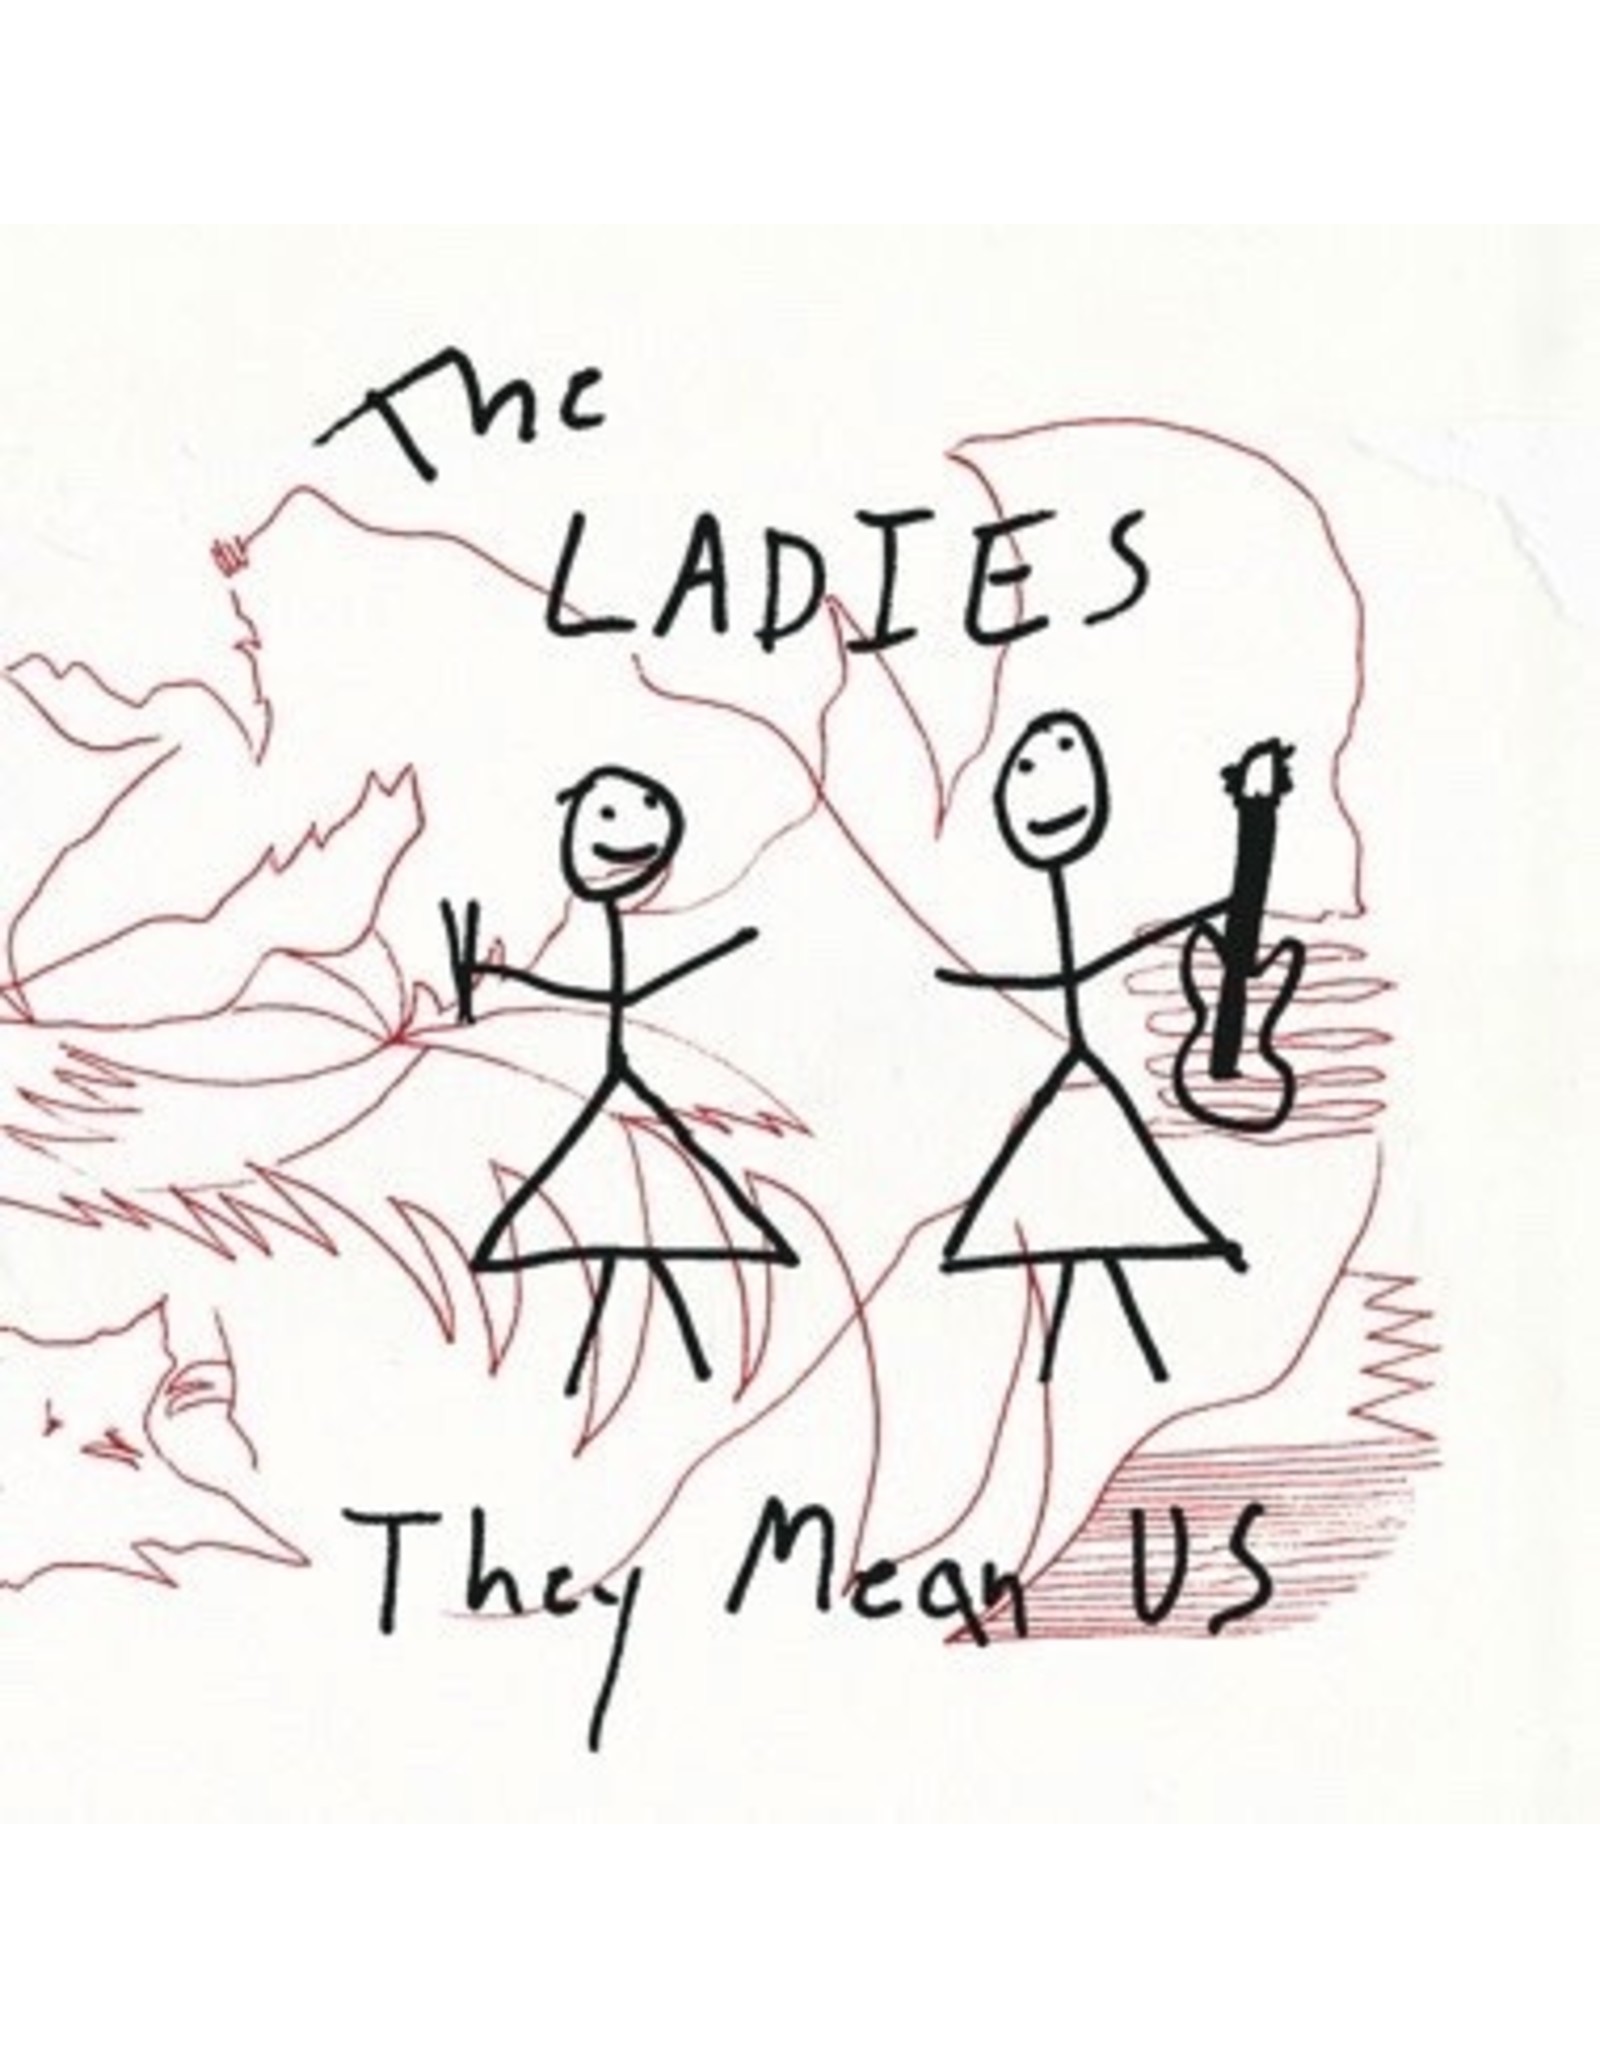 New Vinyl The Ladies - They Mean Us (Mystery Color) LP